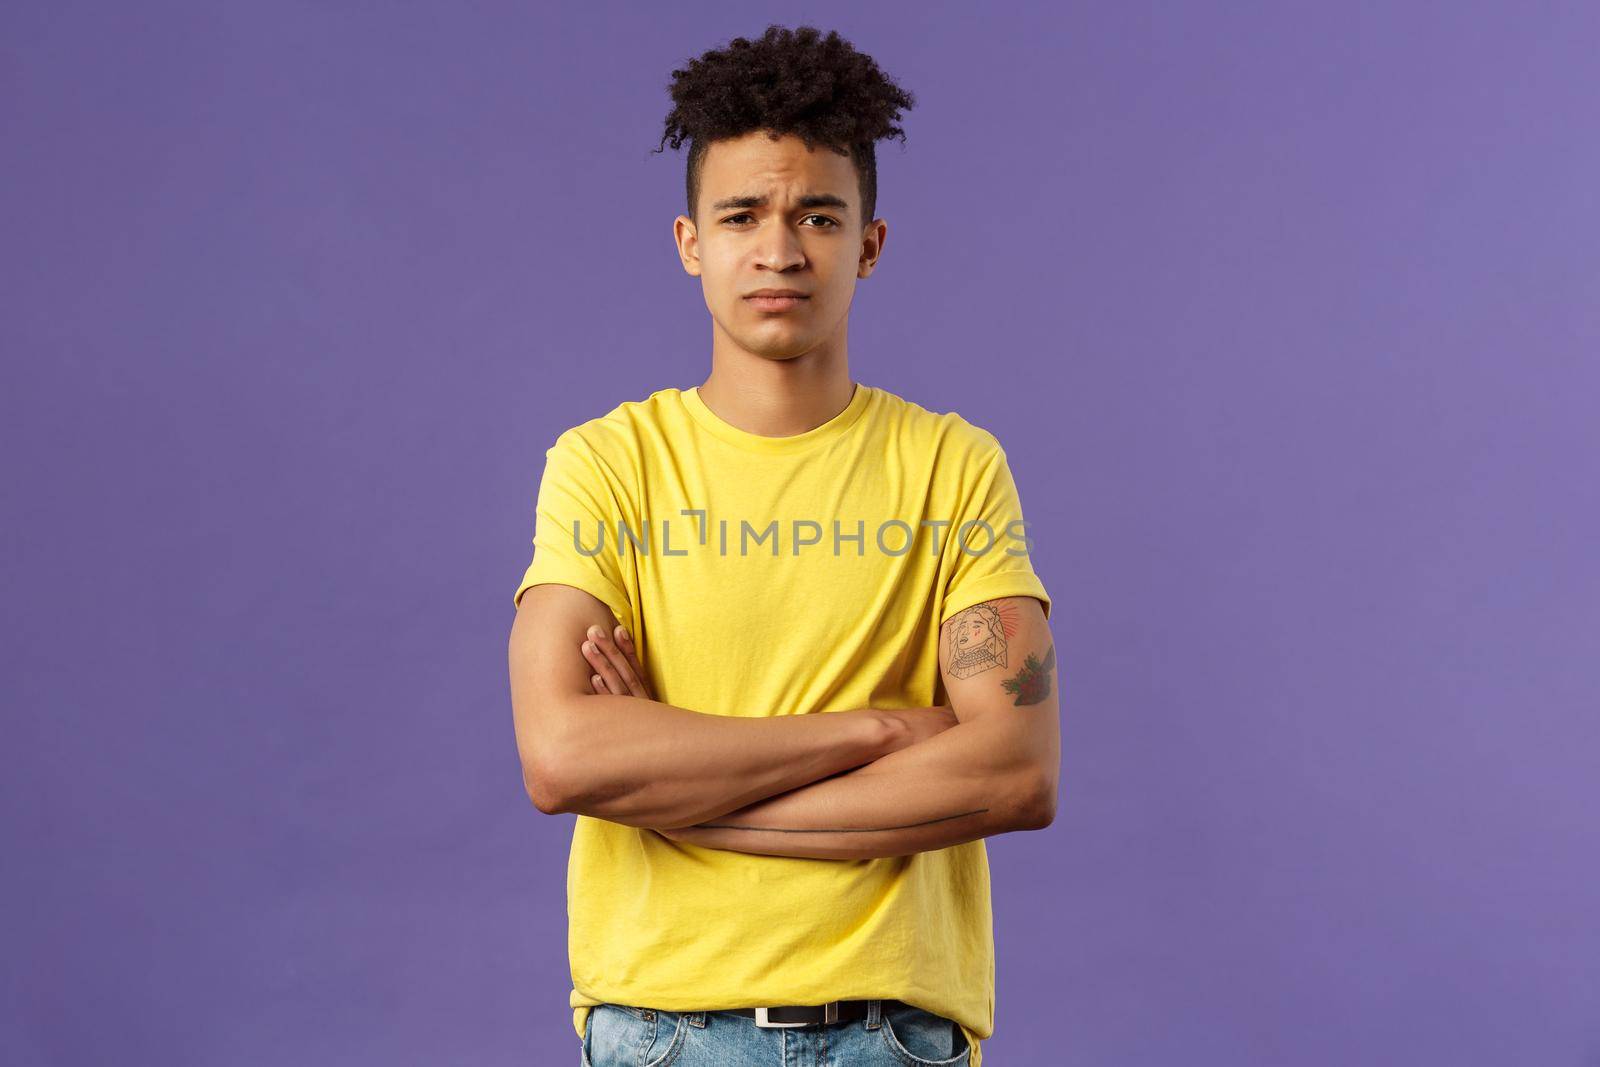 Close-up portrait of skeptical, unimpressed young man with dreads, look judgemental and uninterested, cross arms chest, go on impress me, smirk disappointed, purple background.